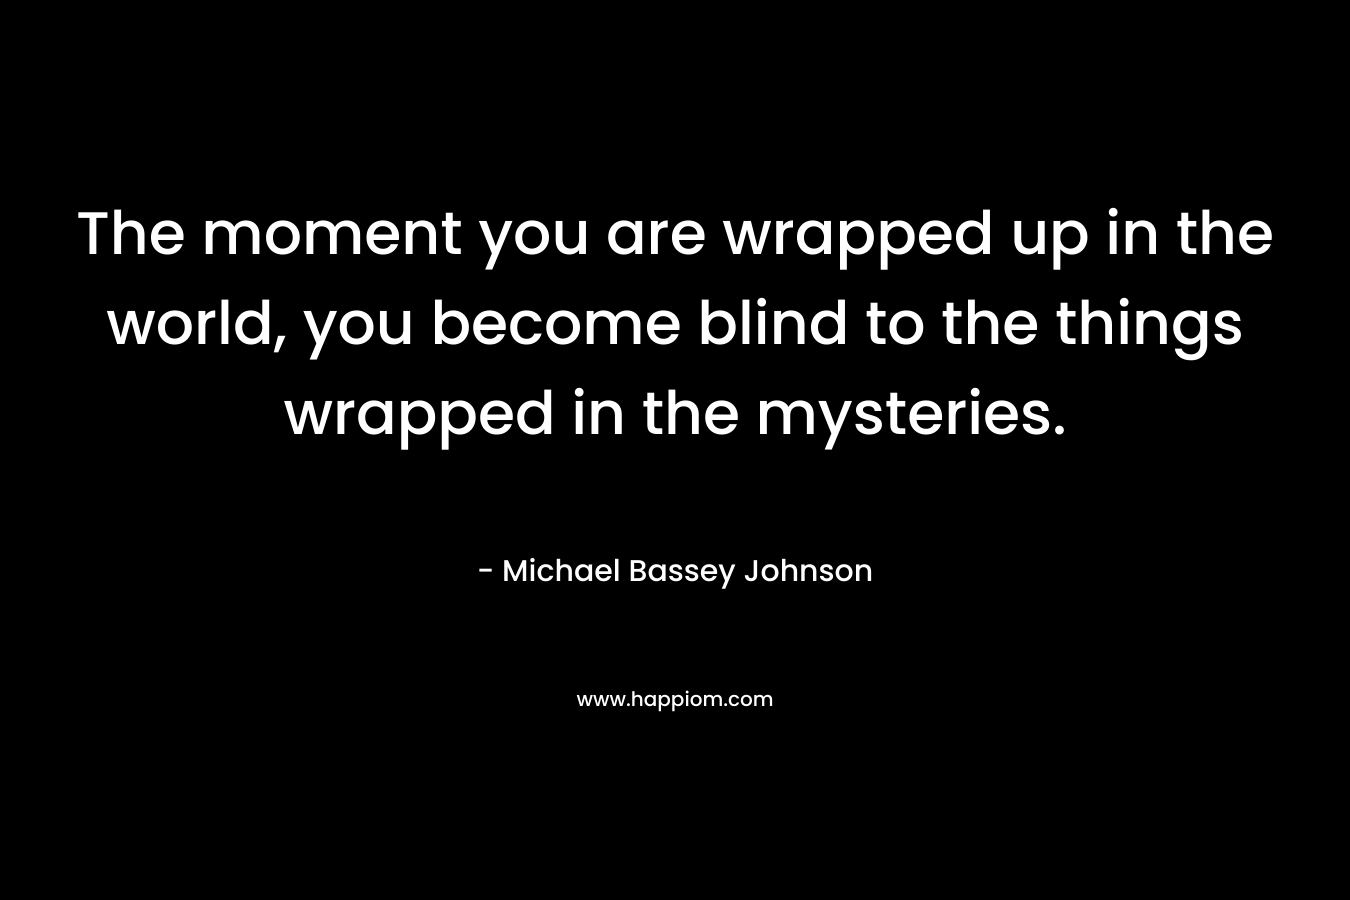 The moment you are wrapped up in the world, you become blind to the things wrapped in the mysteries.